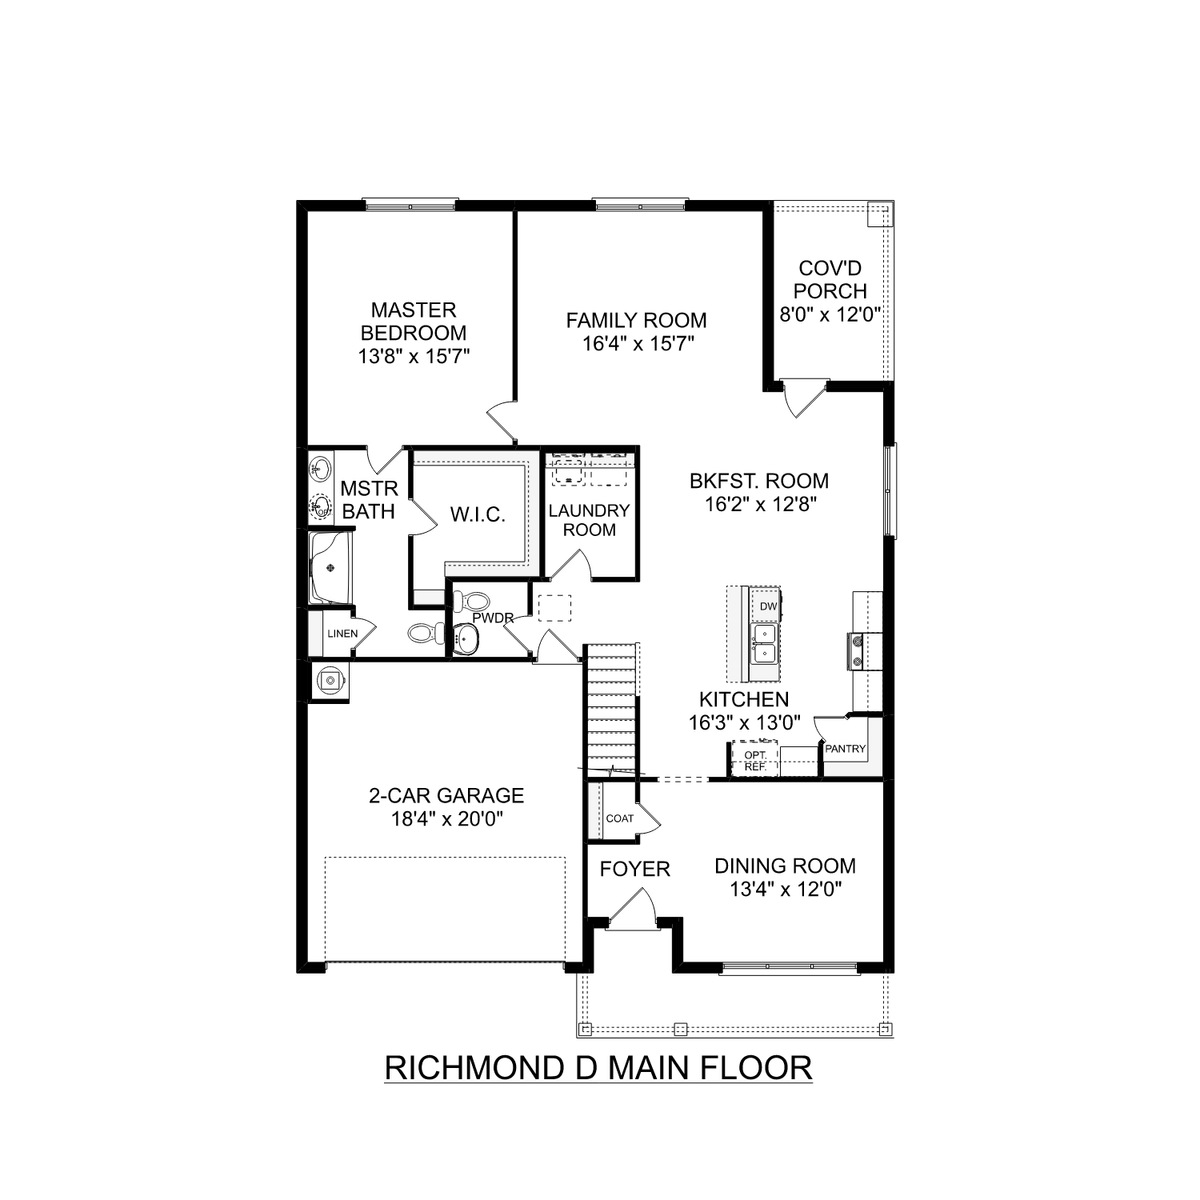 1 - The Richmond D buildable floor plan layout in Davidson Homes' Durham Farms community.